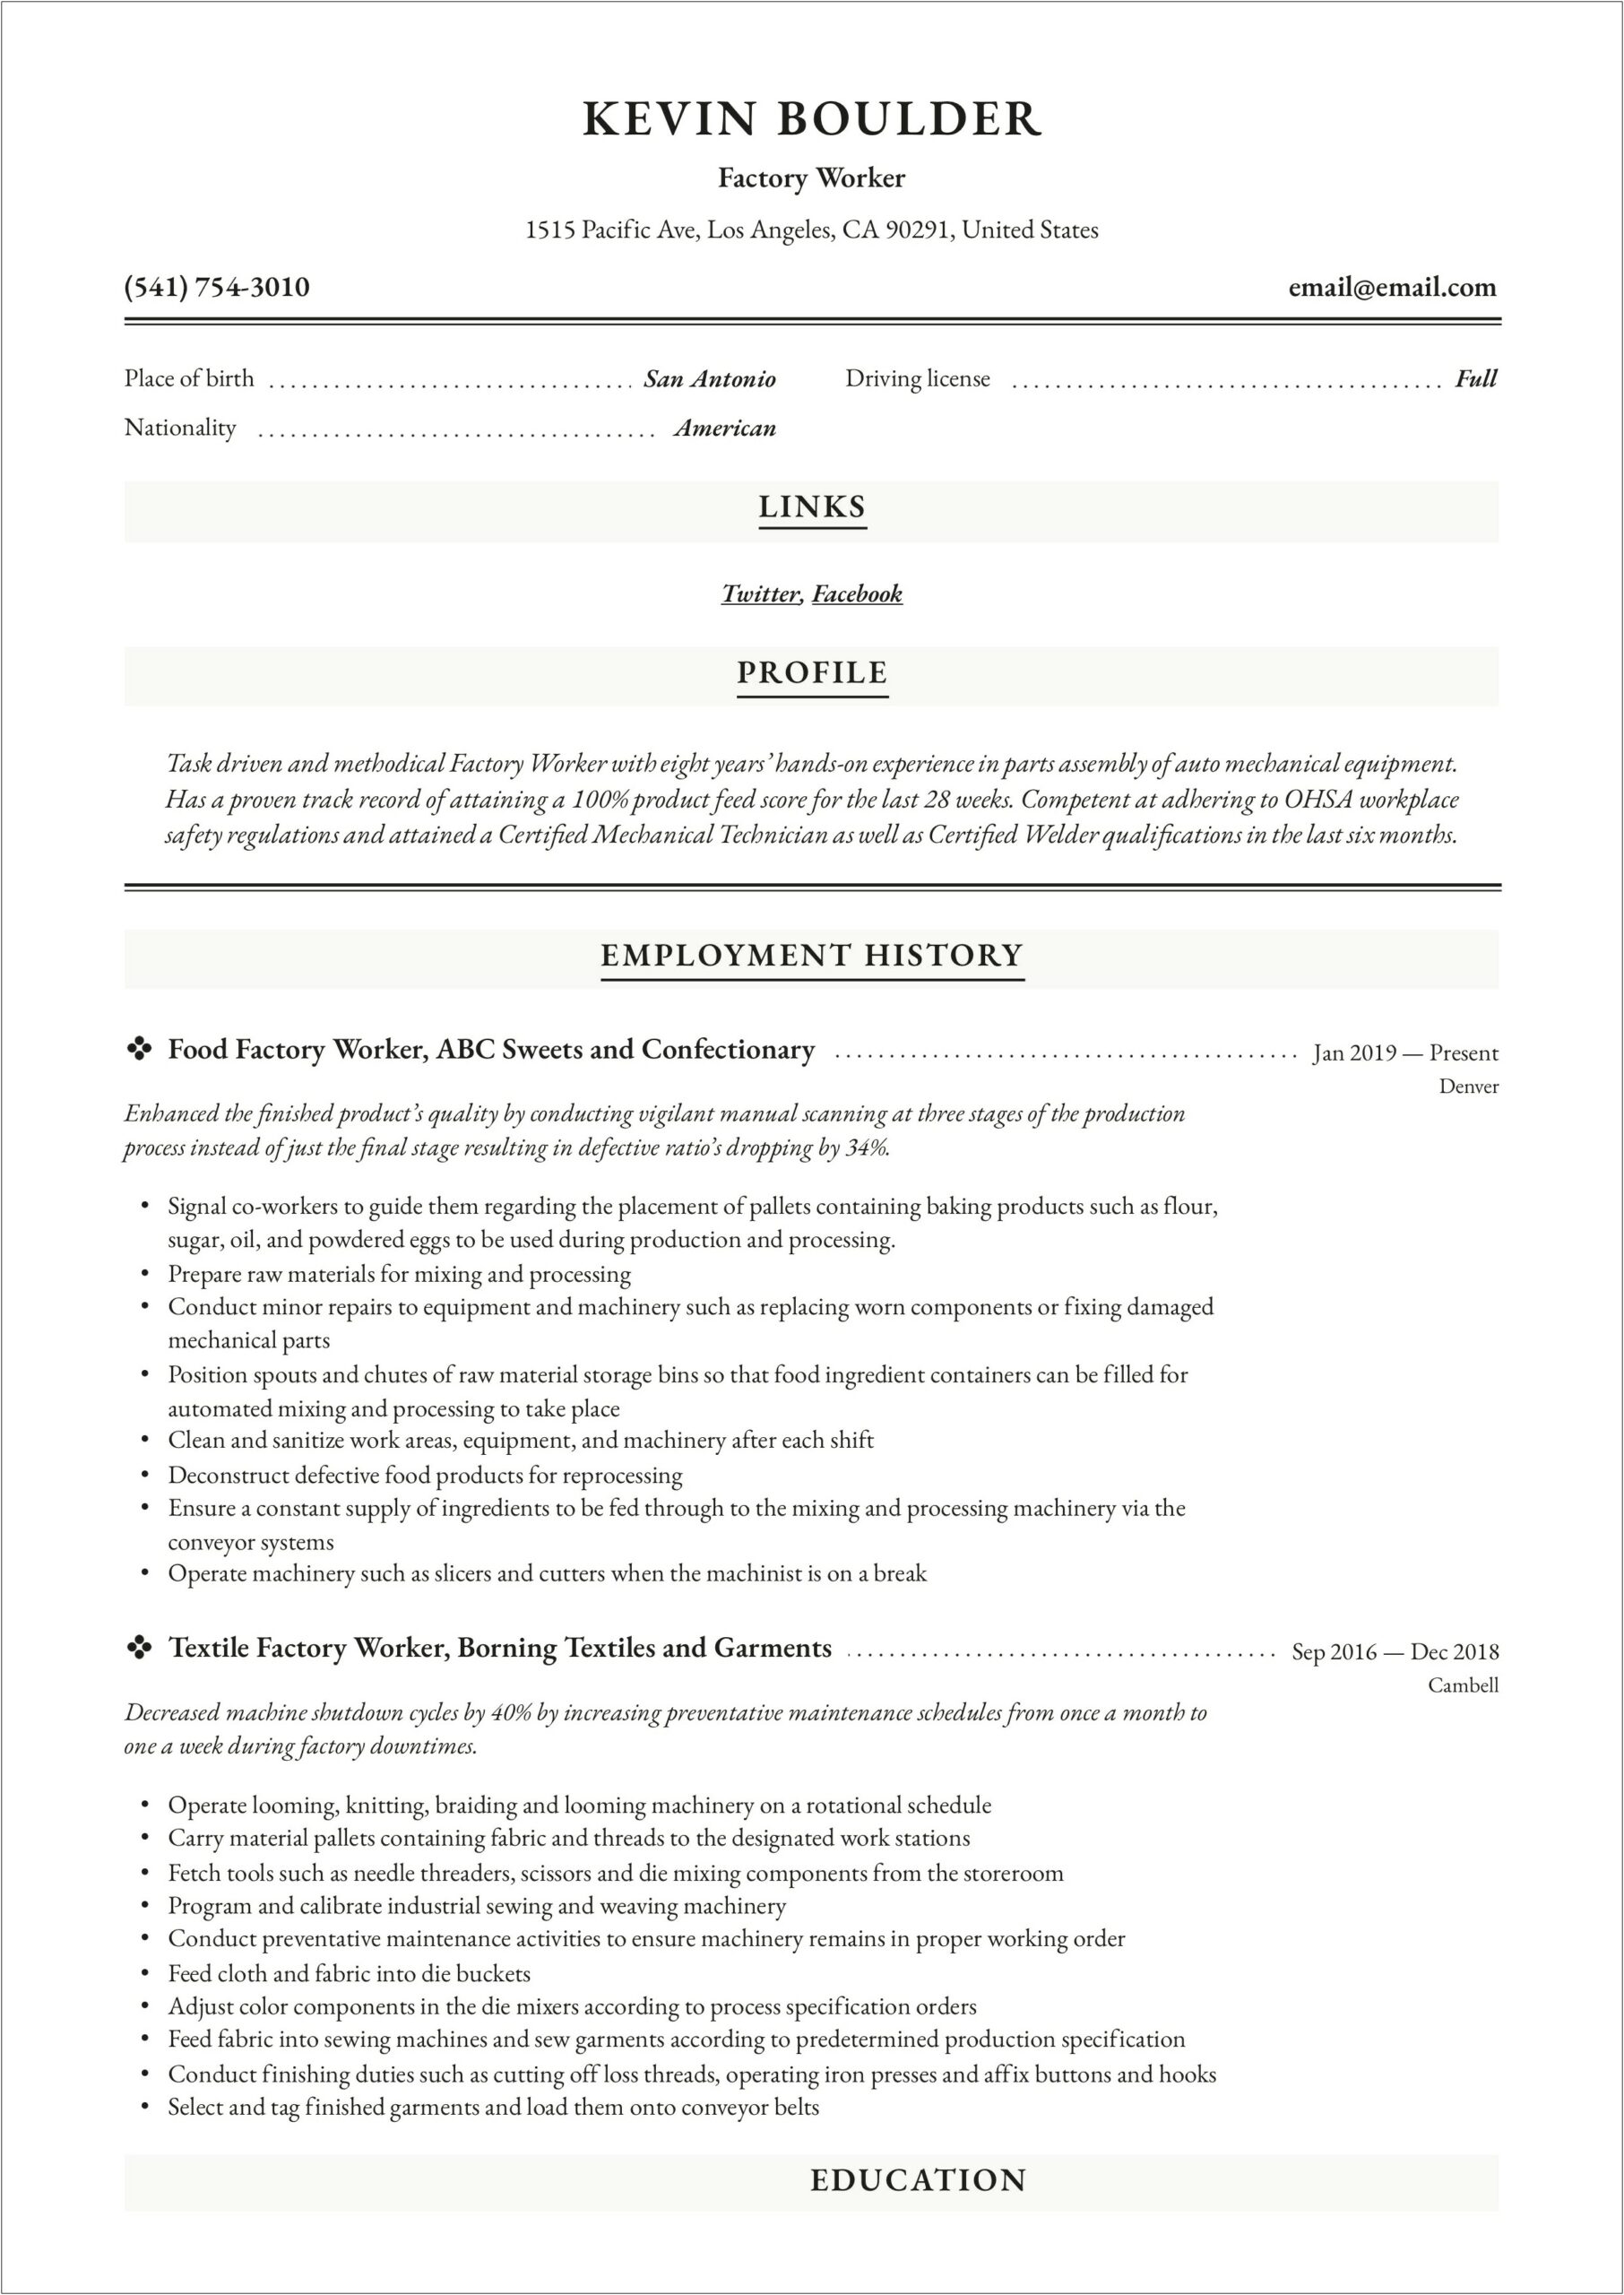 Resume Summary Examples For Factory Worker